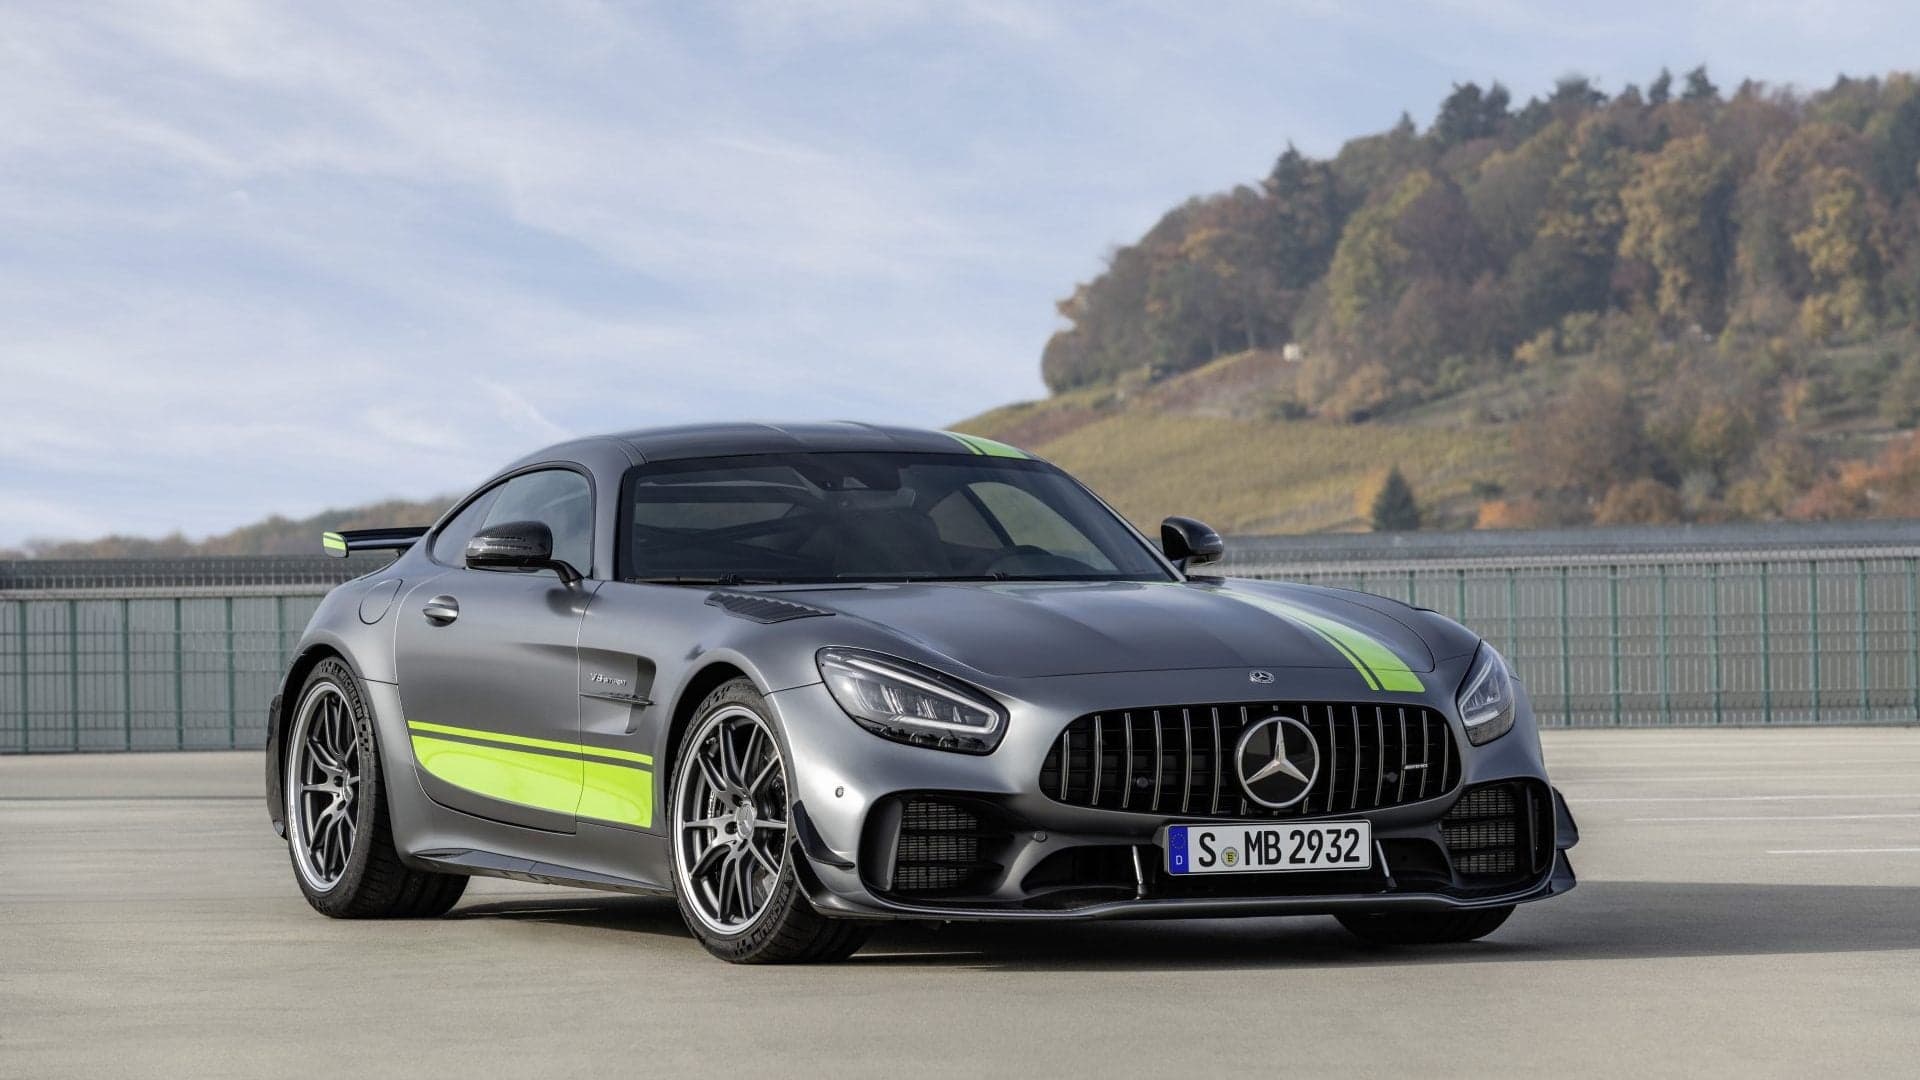 Mercedes-AMG GT Black Series With 630-HP Twin-Turbo V8 Will Arrive in 2020: Report